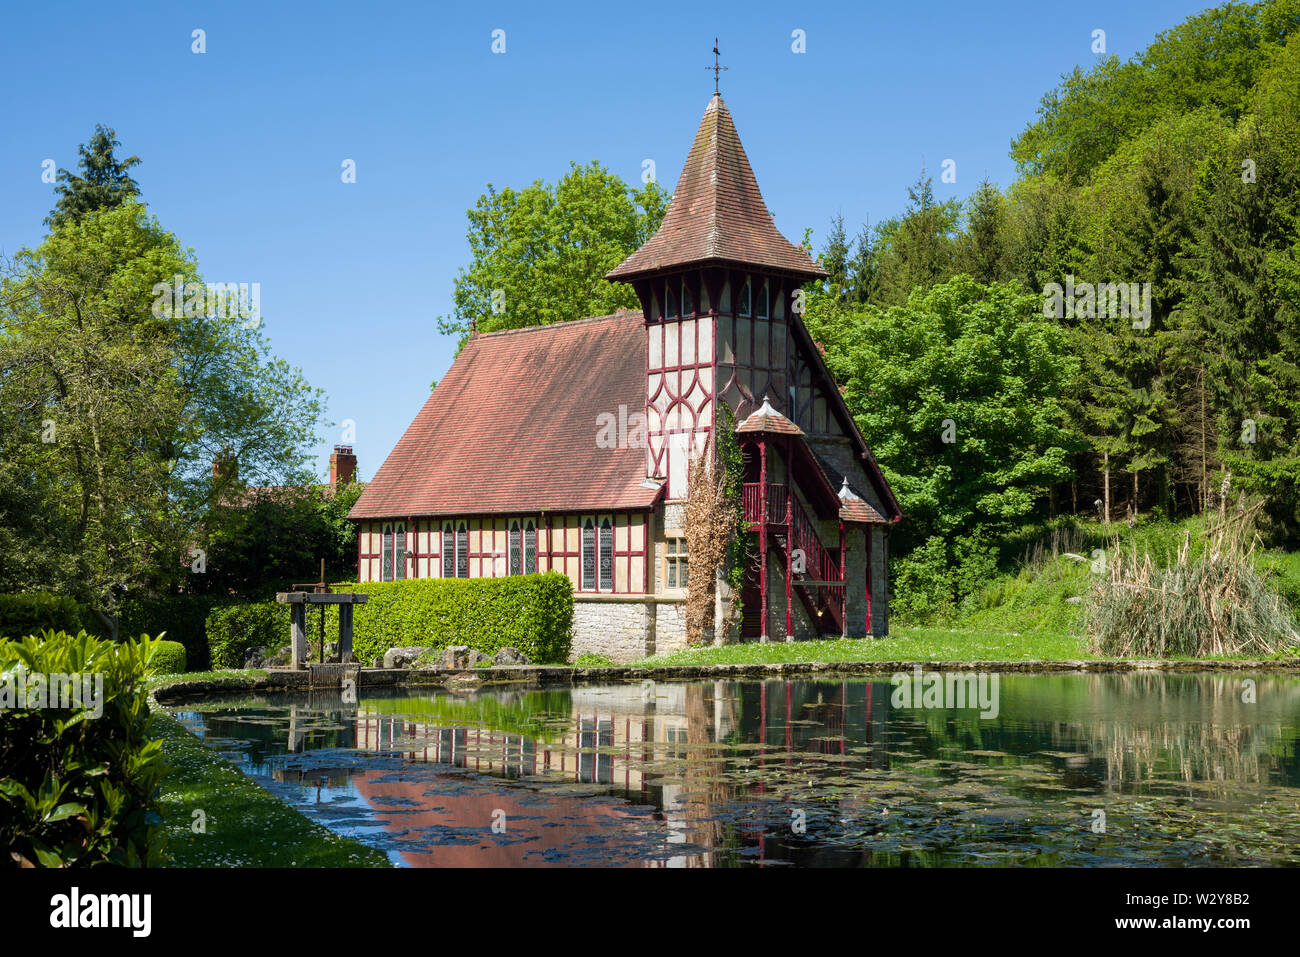 The Masonic Lodge and mill pond at Rickford in the Mendip Hills National Landscape near Blagdon, North Somerset, England. Stock Photo